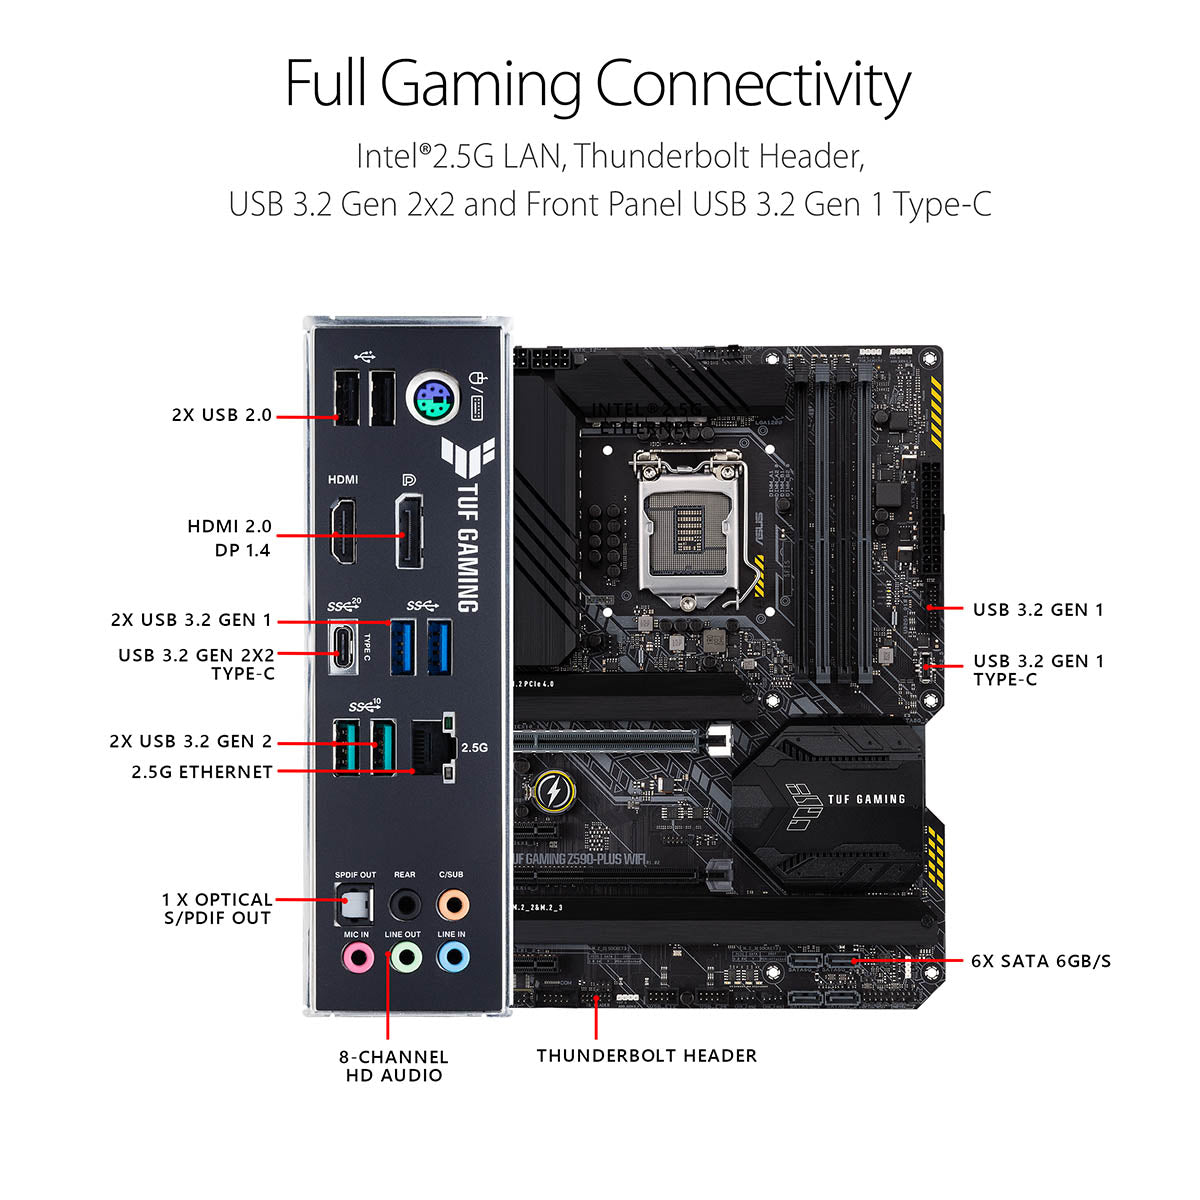 ASUS TUF Gaming Z590-Plus ATX LGA 1200 Motherboard with Thunderbolt 4 Support and AI Noise Cancelation